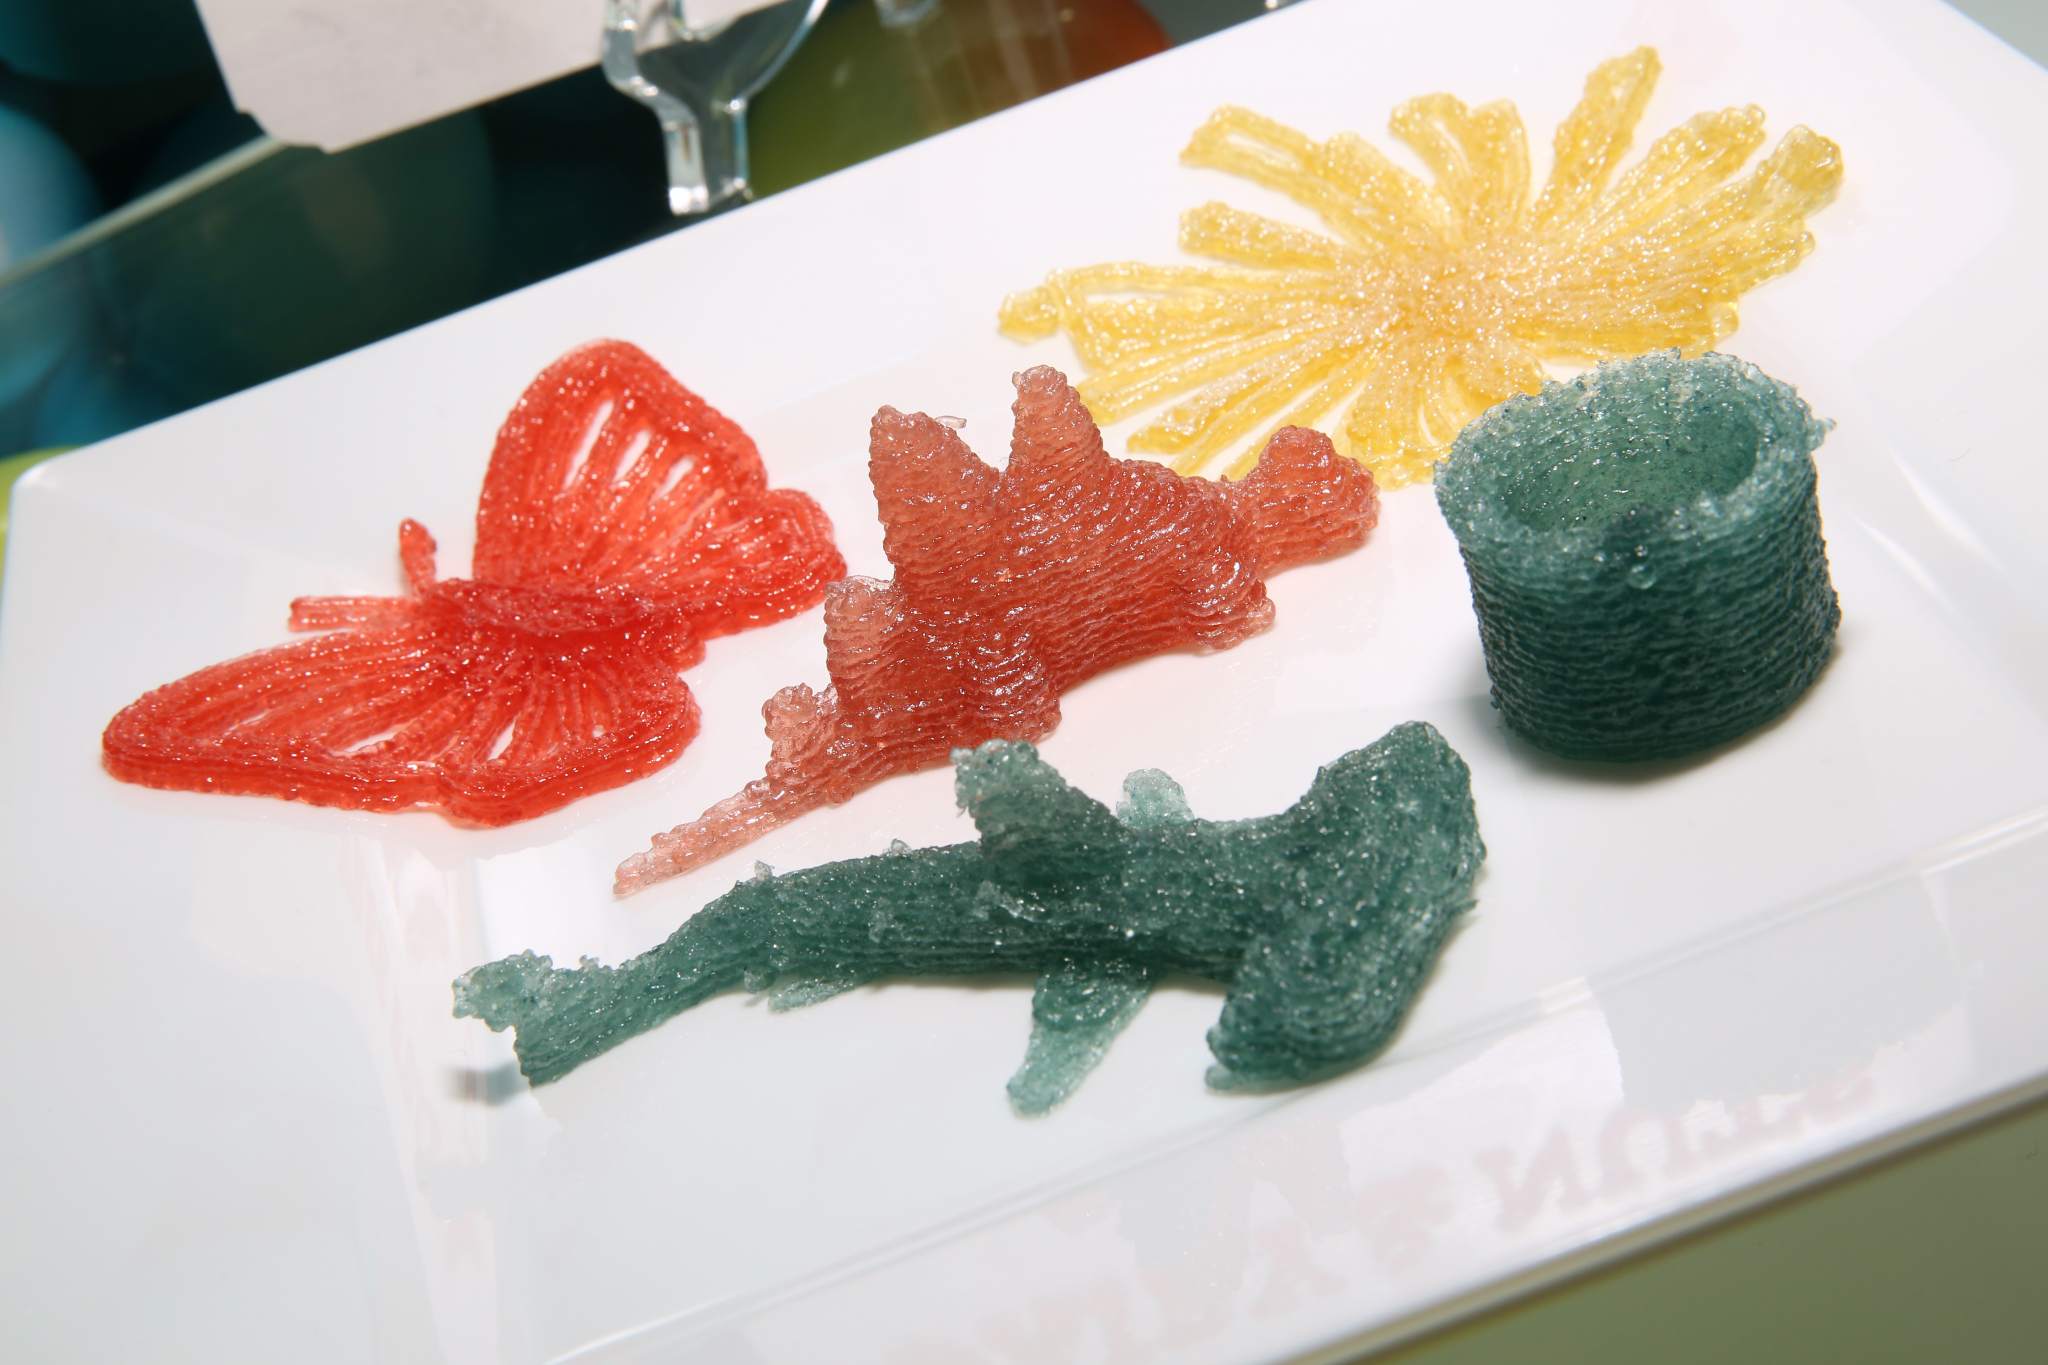 Gummy candy printed in the shape of a butterfly, a stegosaurus and a hammerhead shark. Photo via: Cindy Ord/Getty Images for Dylan's Candy Bar